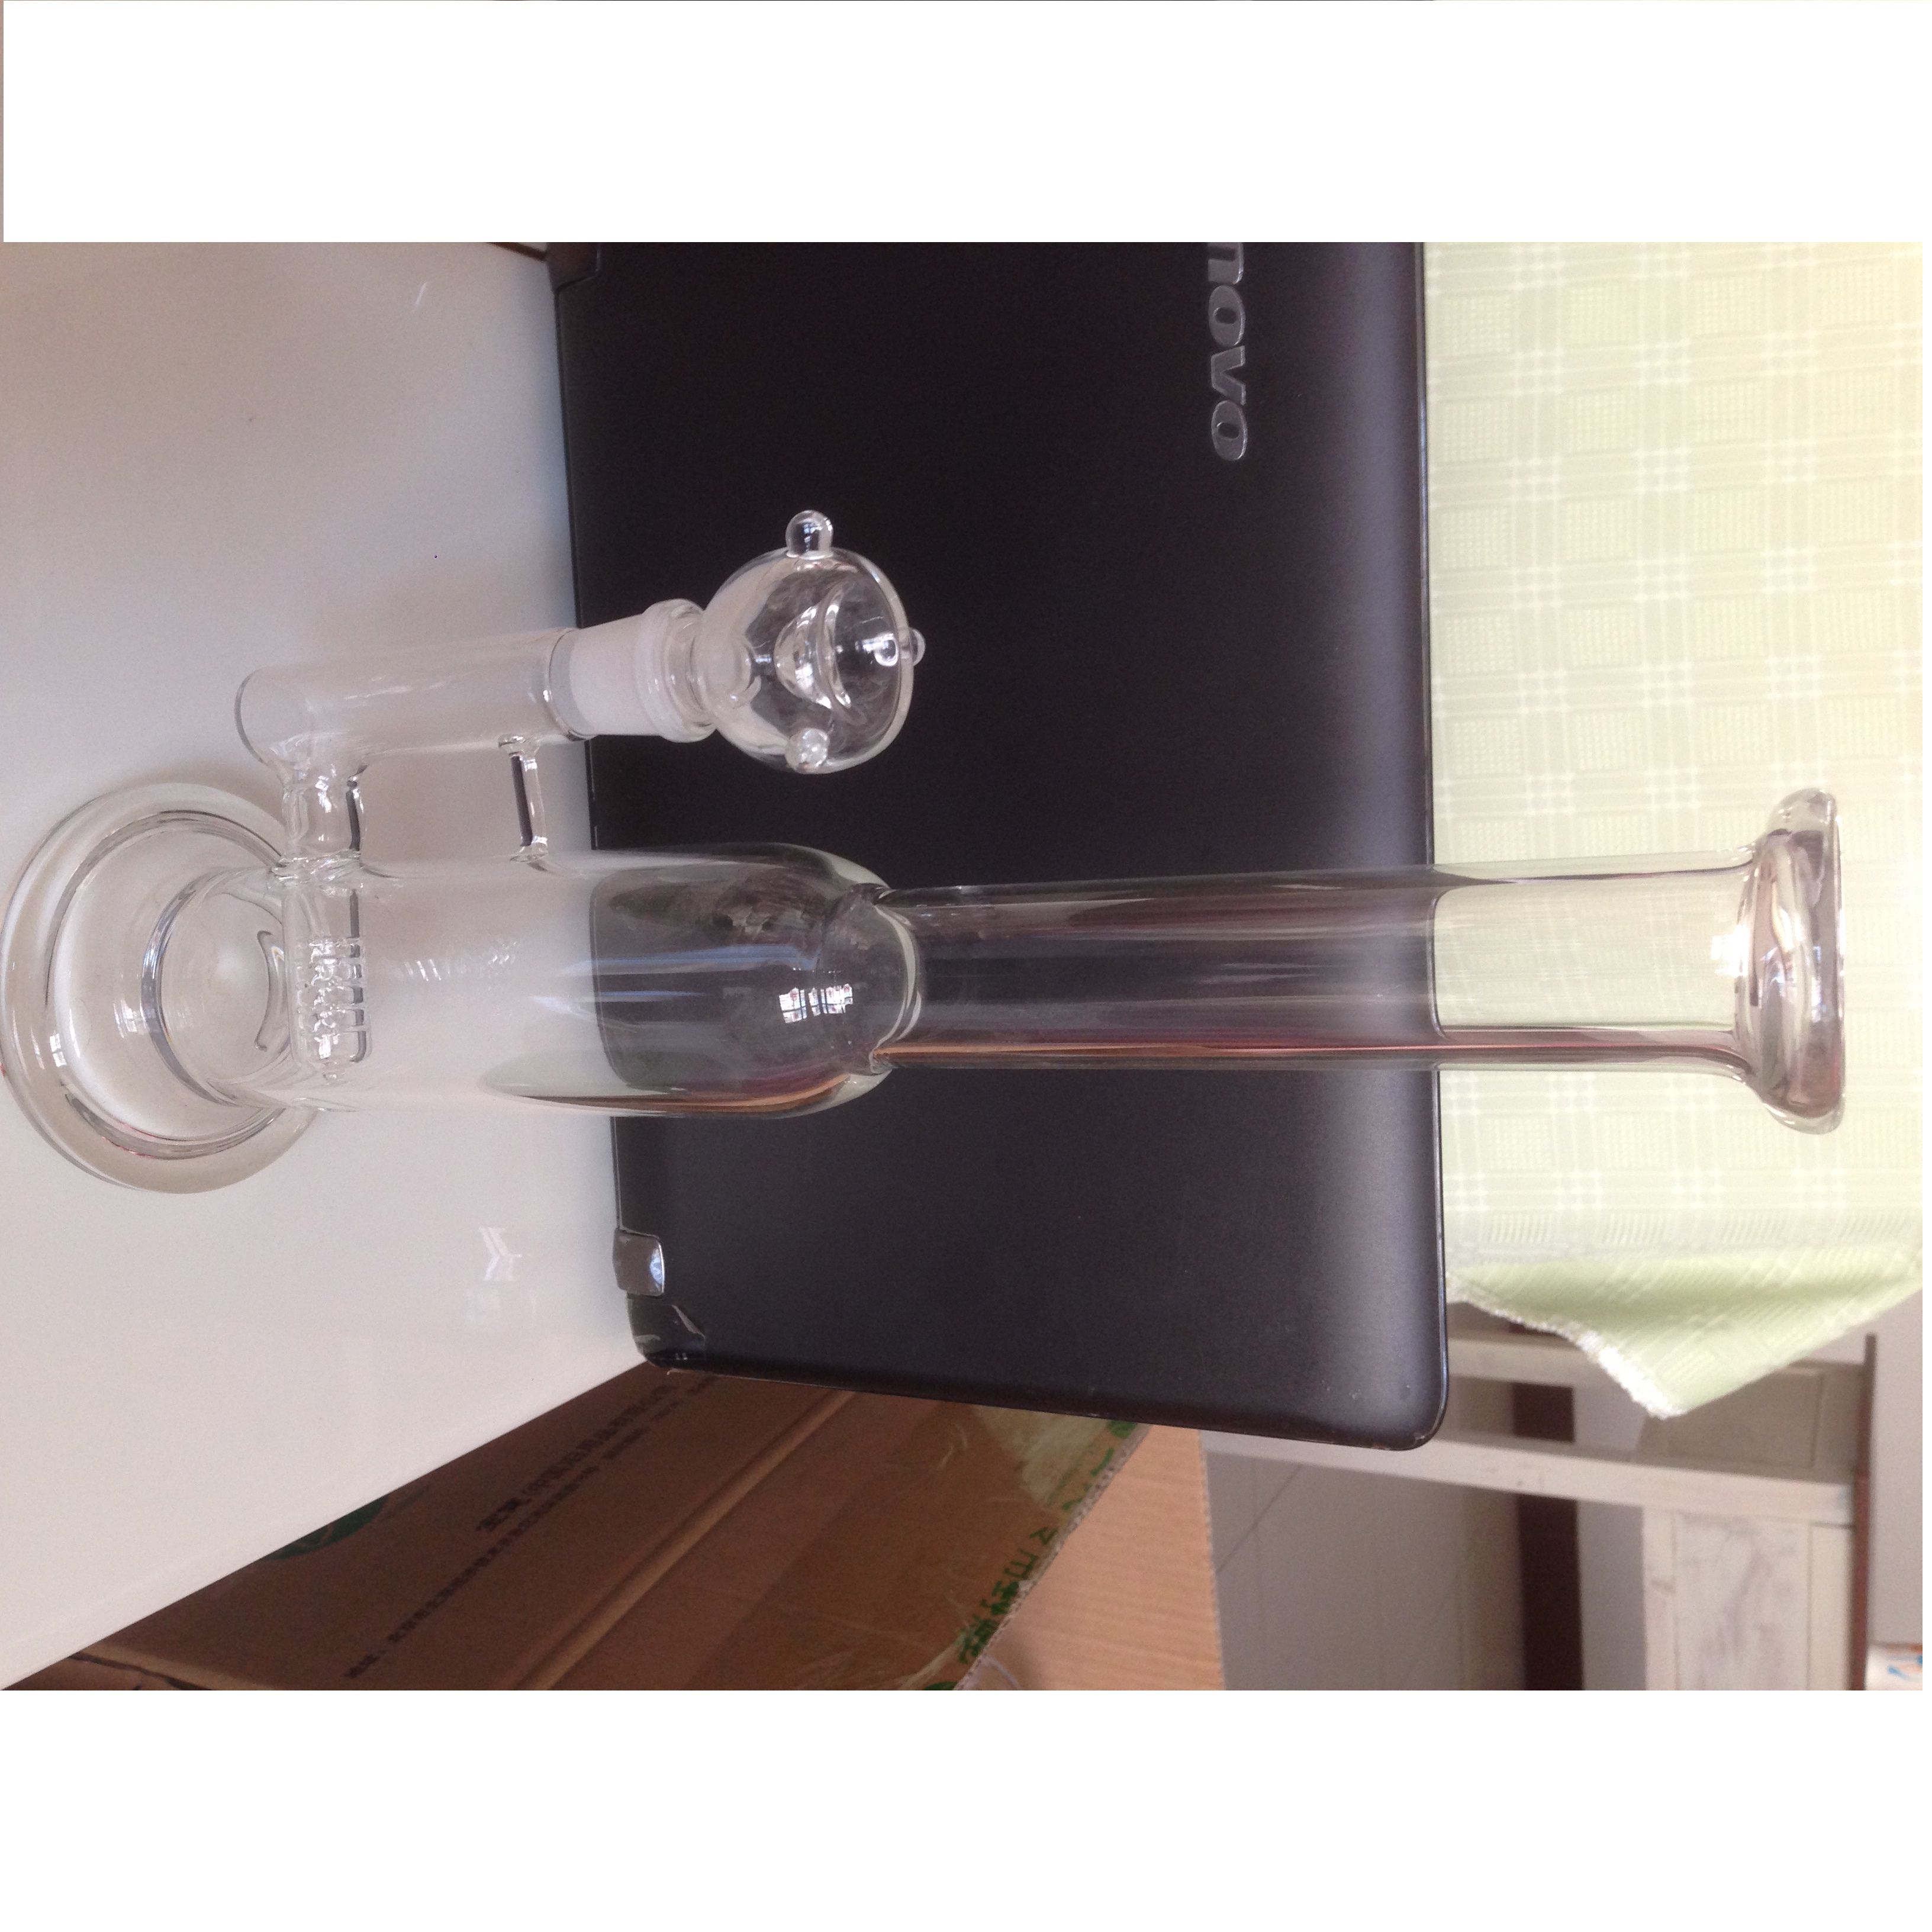 2019 2015 Glass Bong Factory Direct Wholesale Newest Big Size From Glassbeautystore, $44.23 ...